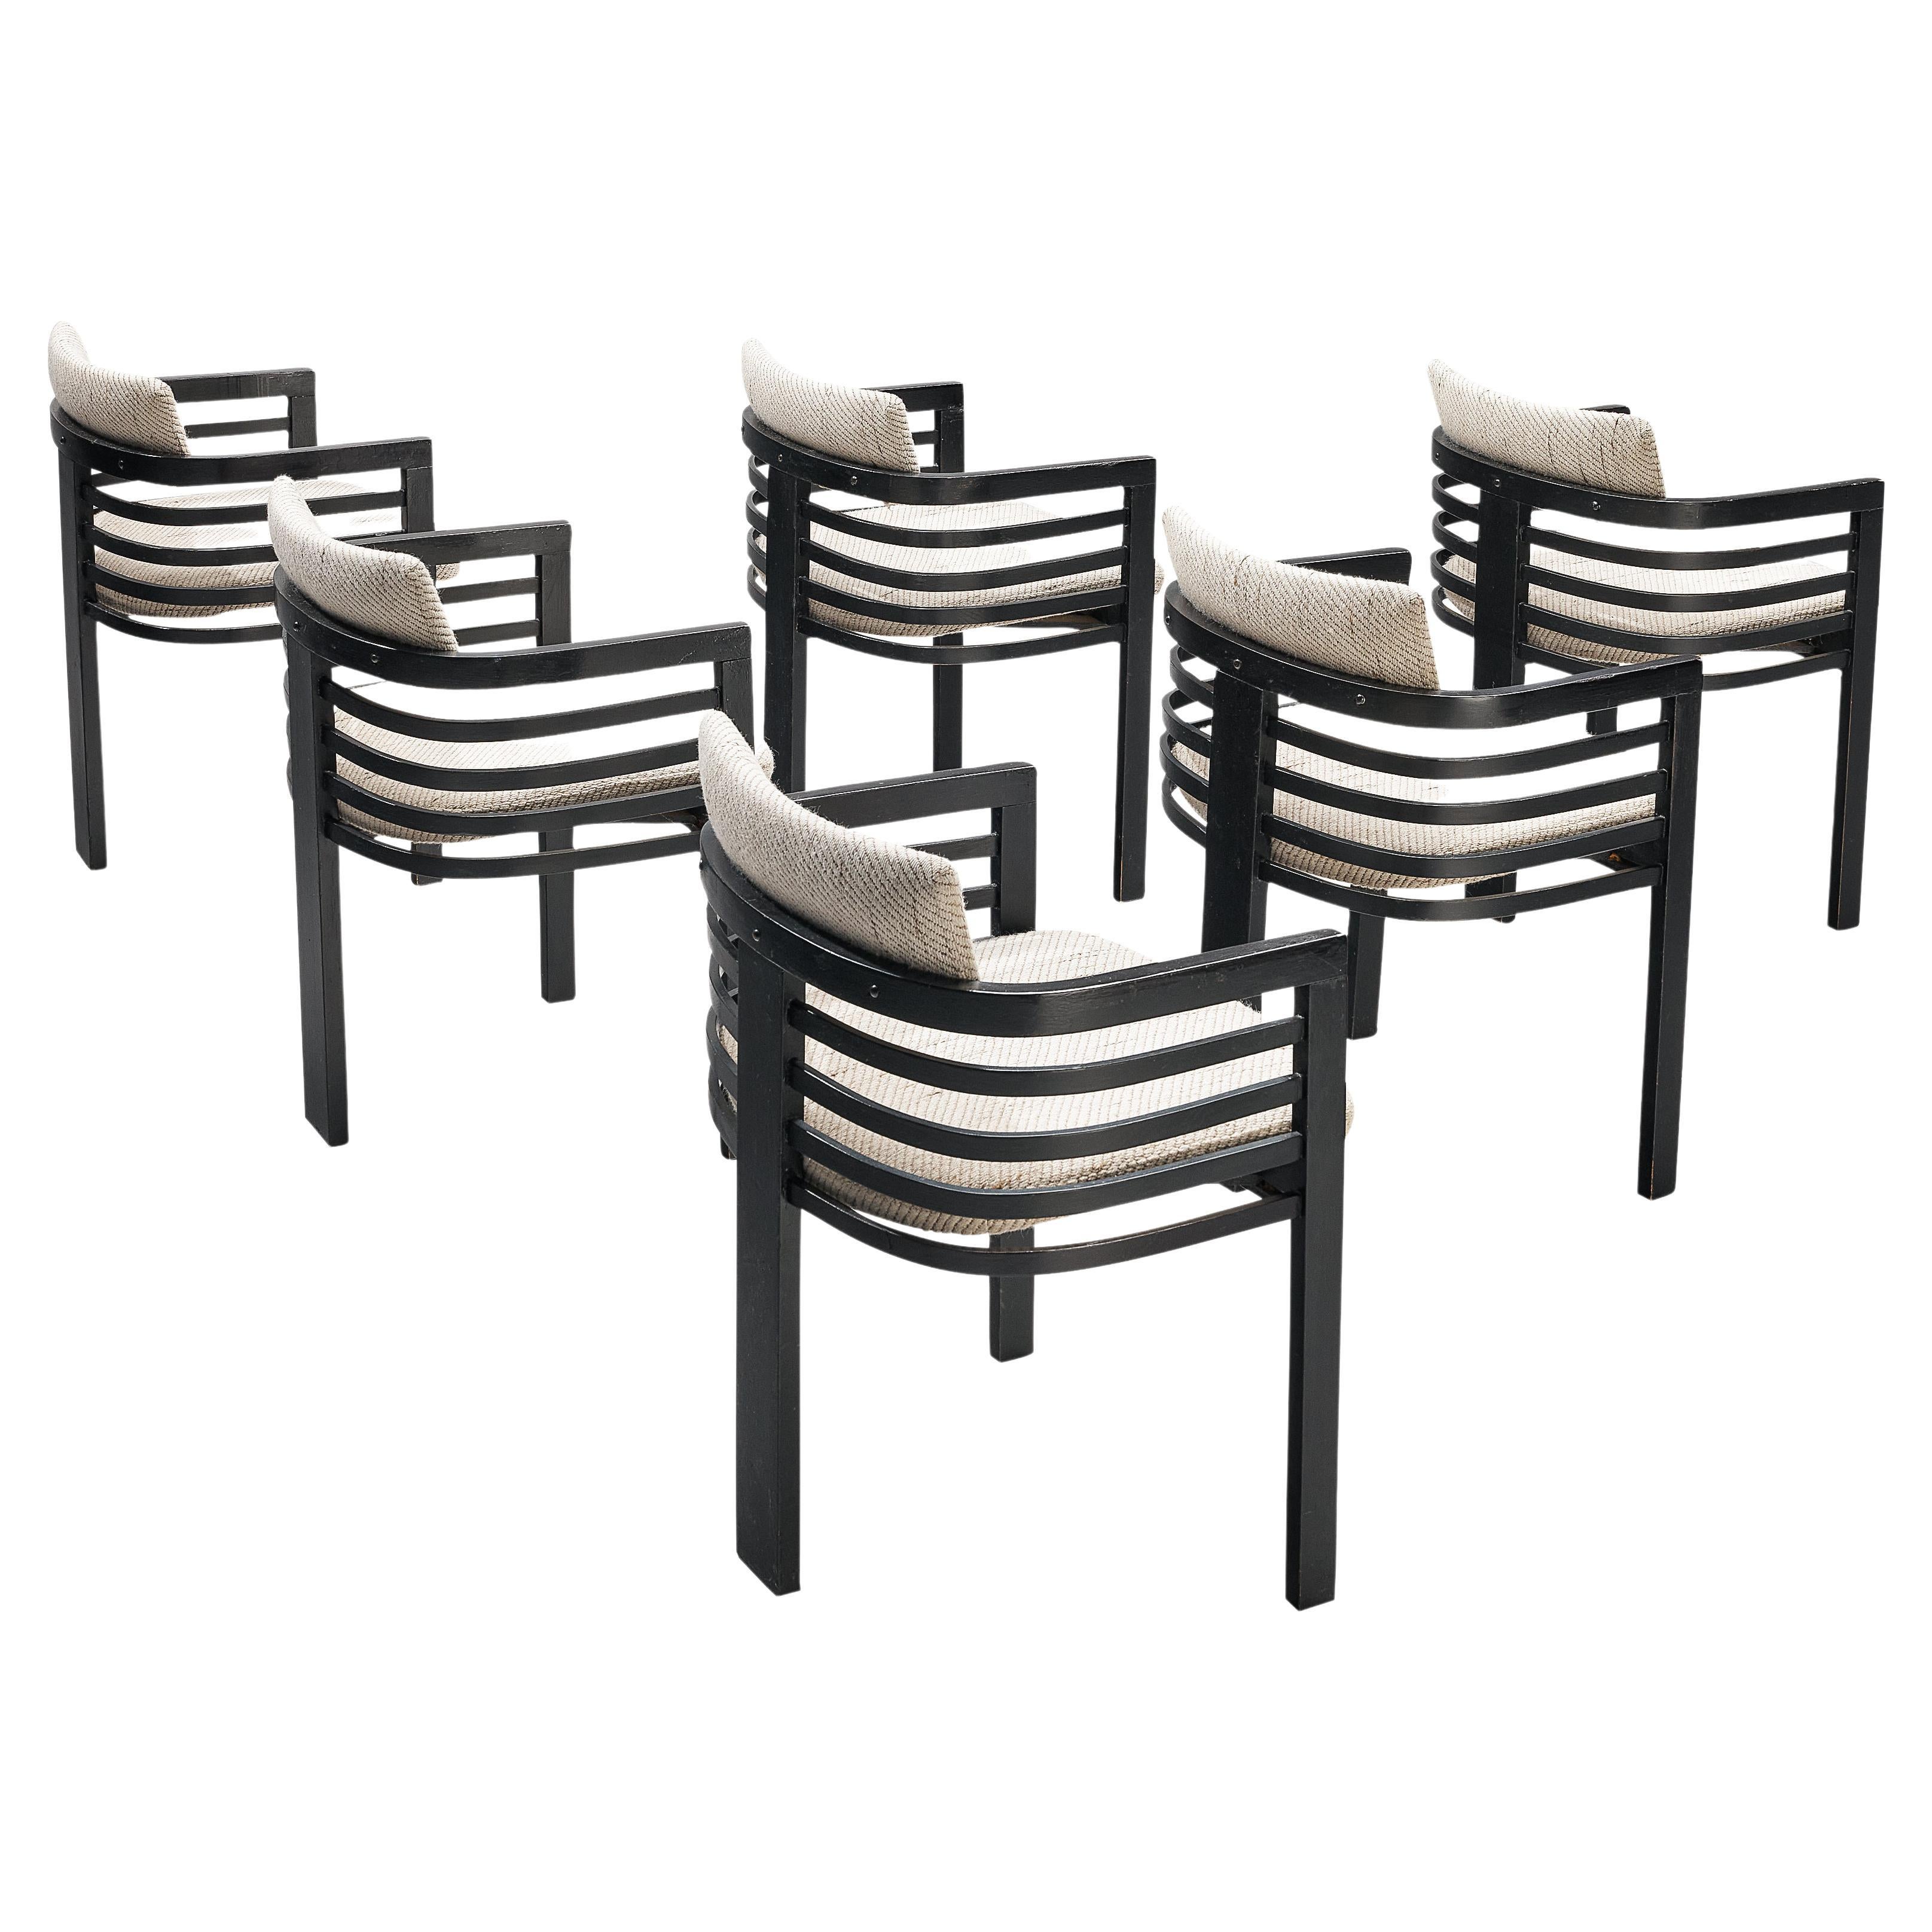 Set of Six Three-Legged Italian Dining Chairs with Fabric Upholstery